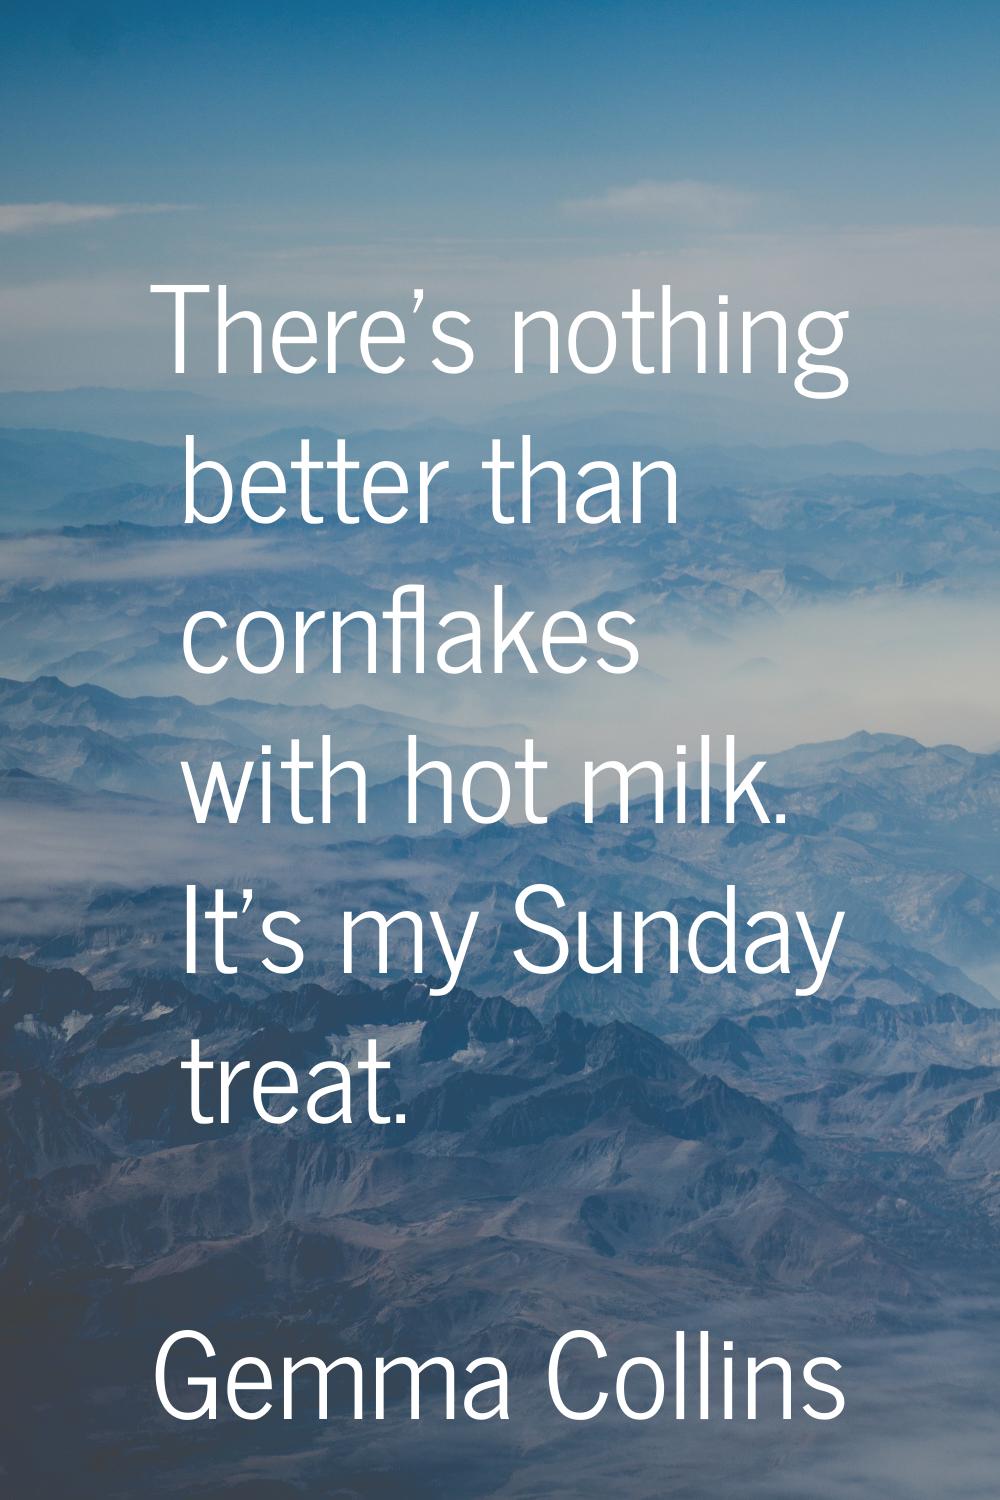 There's nothing better than cornflakes with hot milk. It's my Sunday treat.